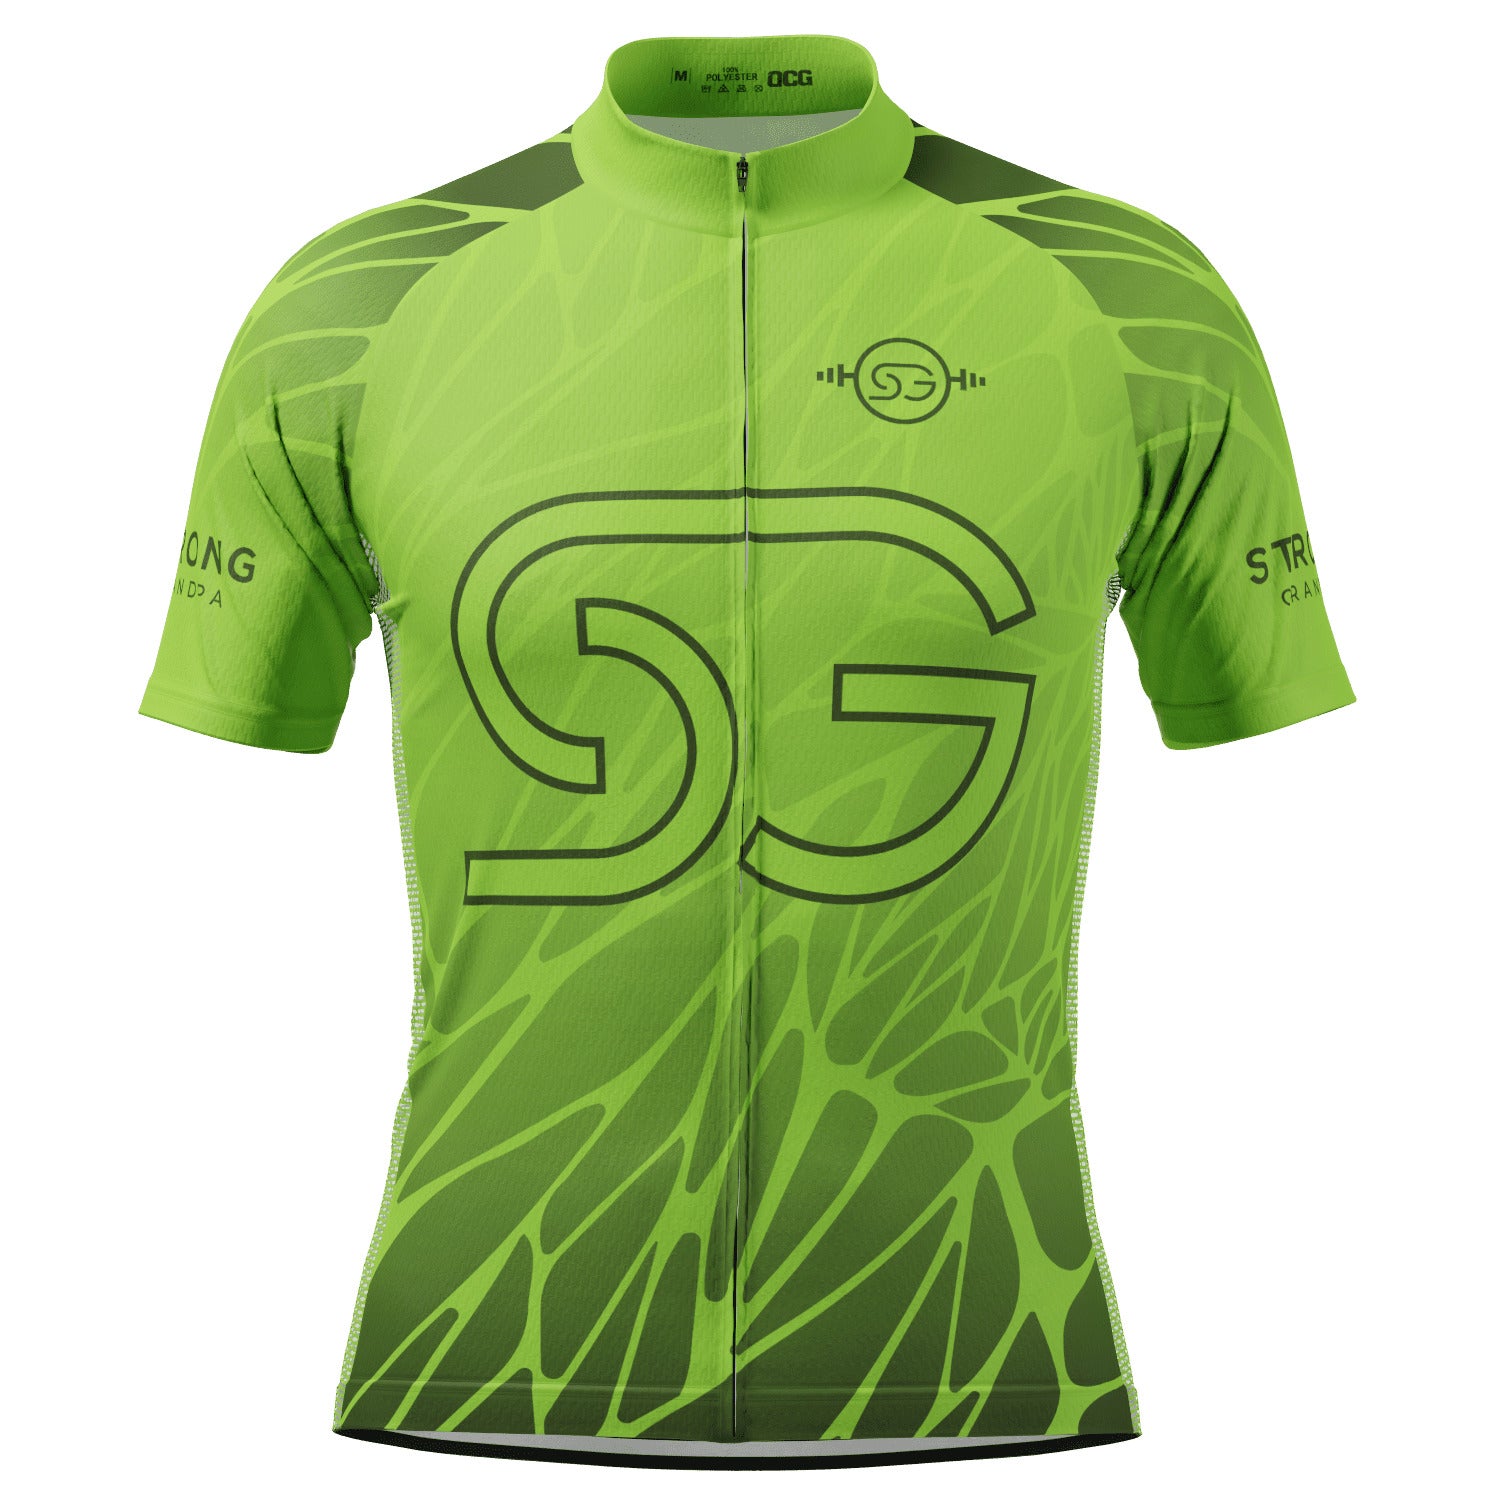 Men's SG - Live Your Best Life Short Sleeve Cycling Jersey